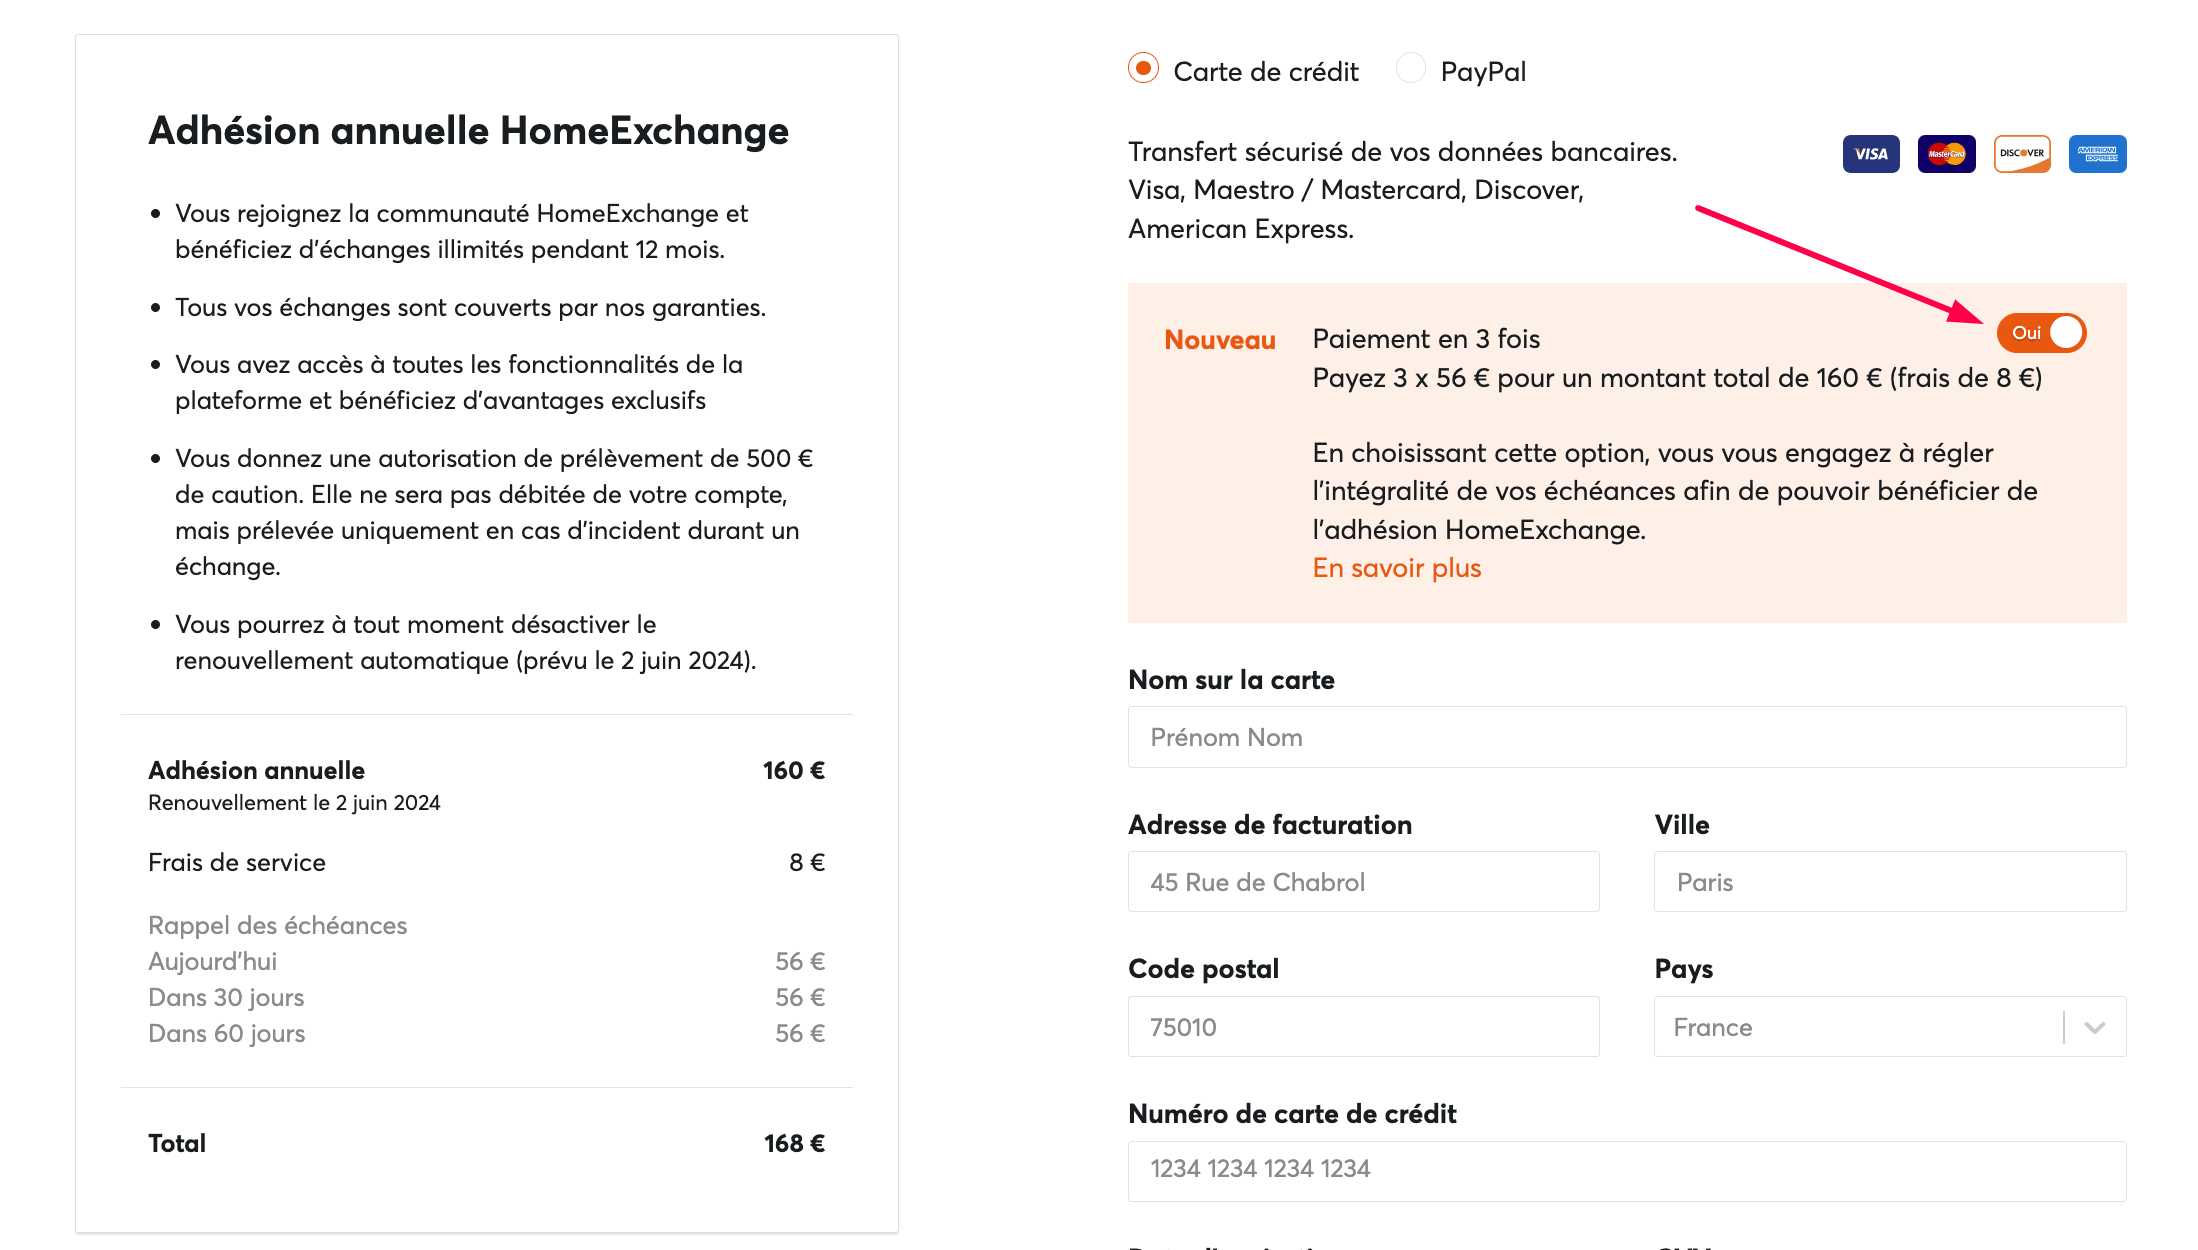 Payment_page_3x_FR.png